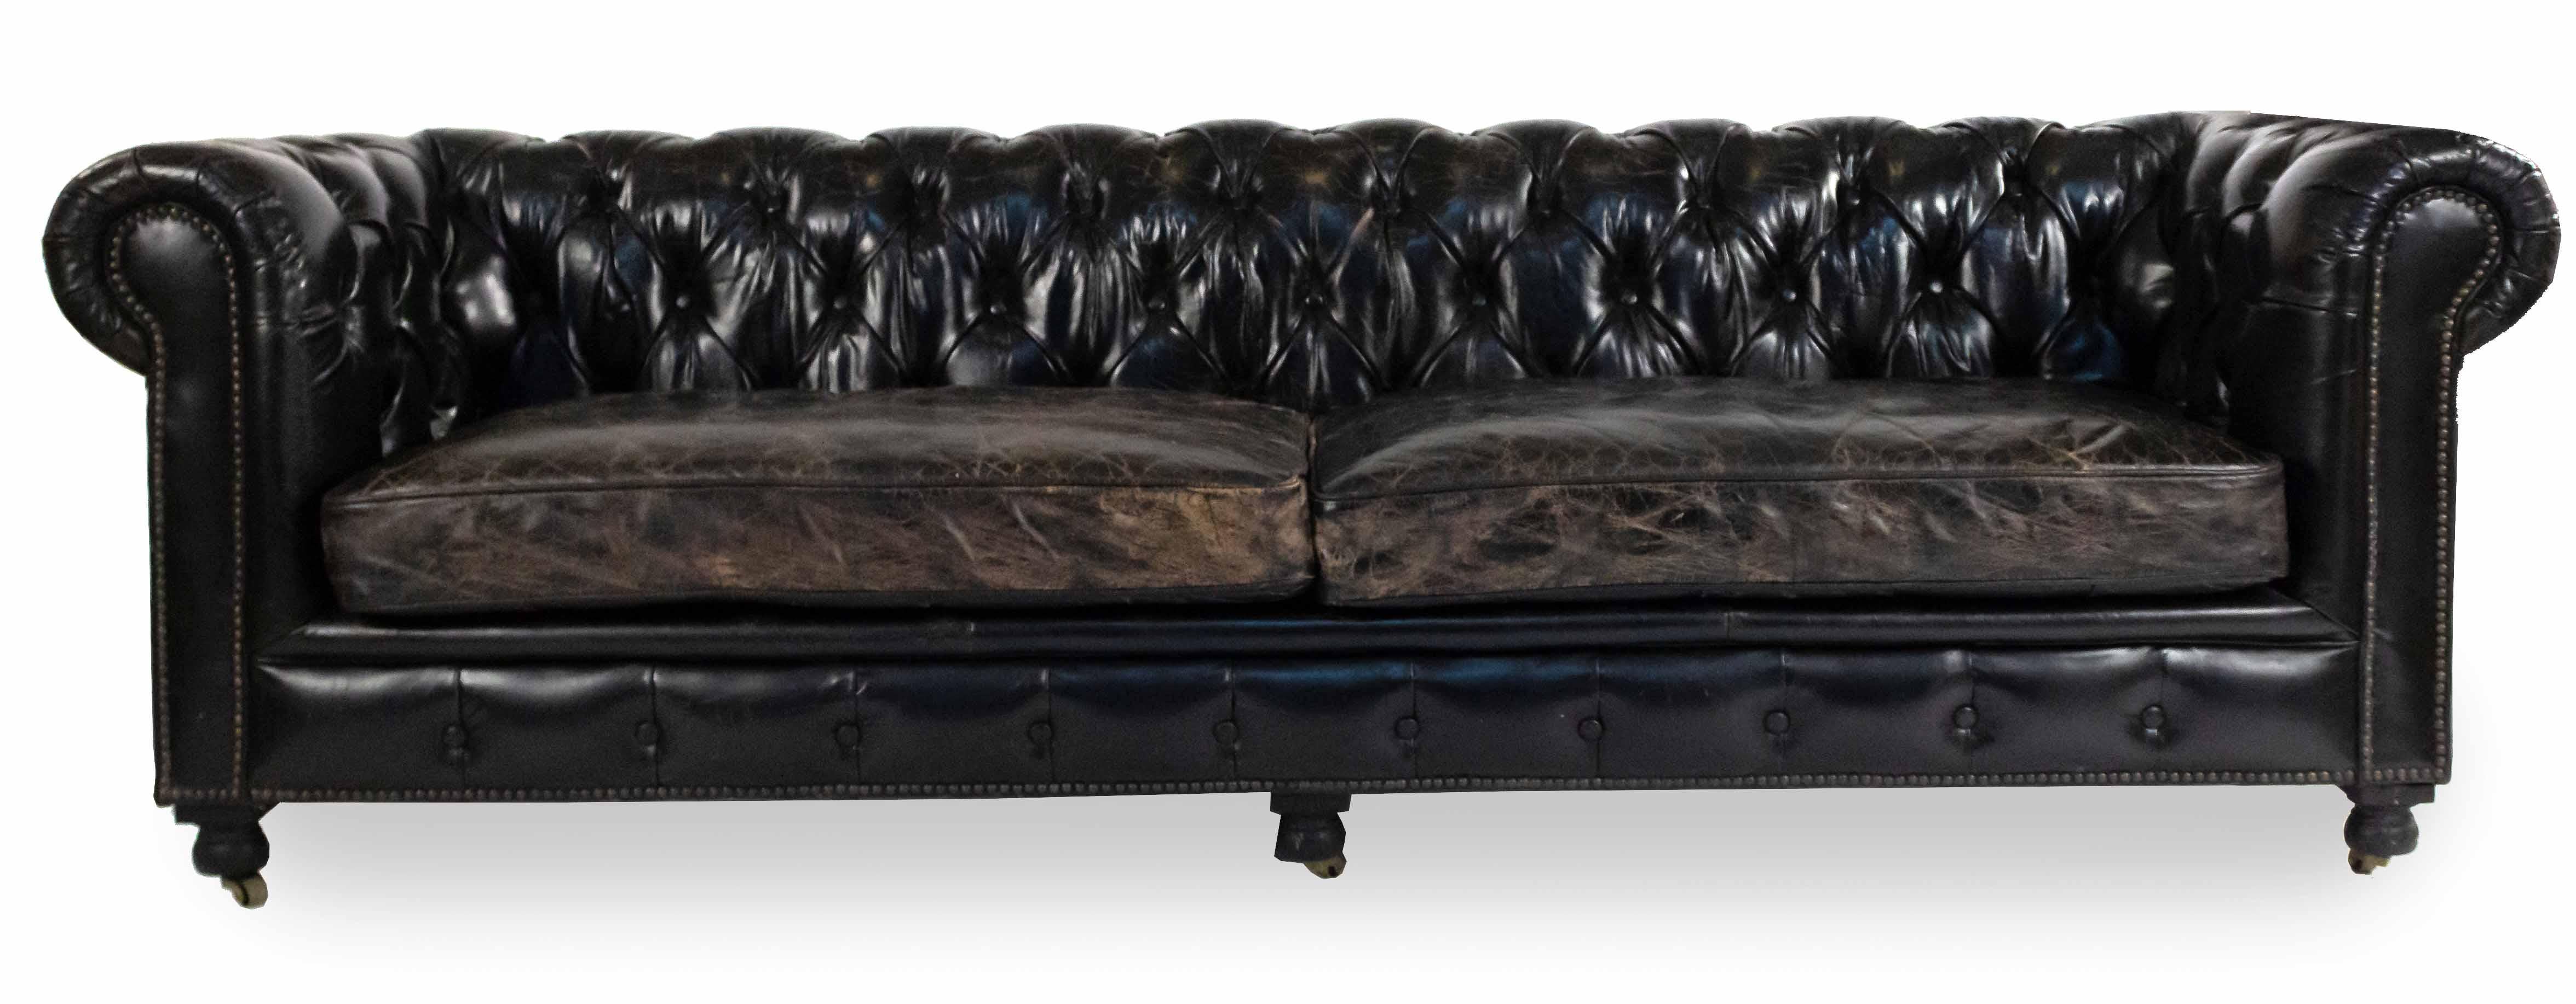 English Victorian style blackish brown tufted leather chesterfield sofa with distressed finish having out-scrolled arms with brass hail head trim & 2 seat cushions on wooden bun feet with casters and having brass hail head trim.
  